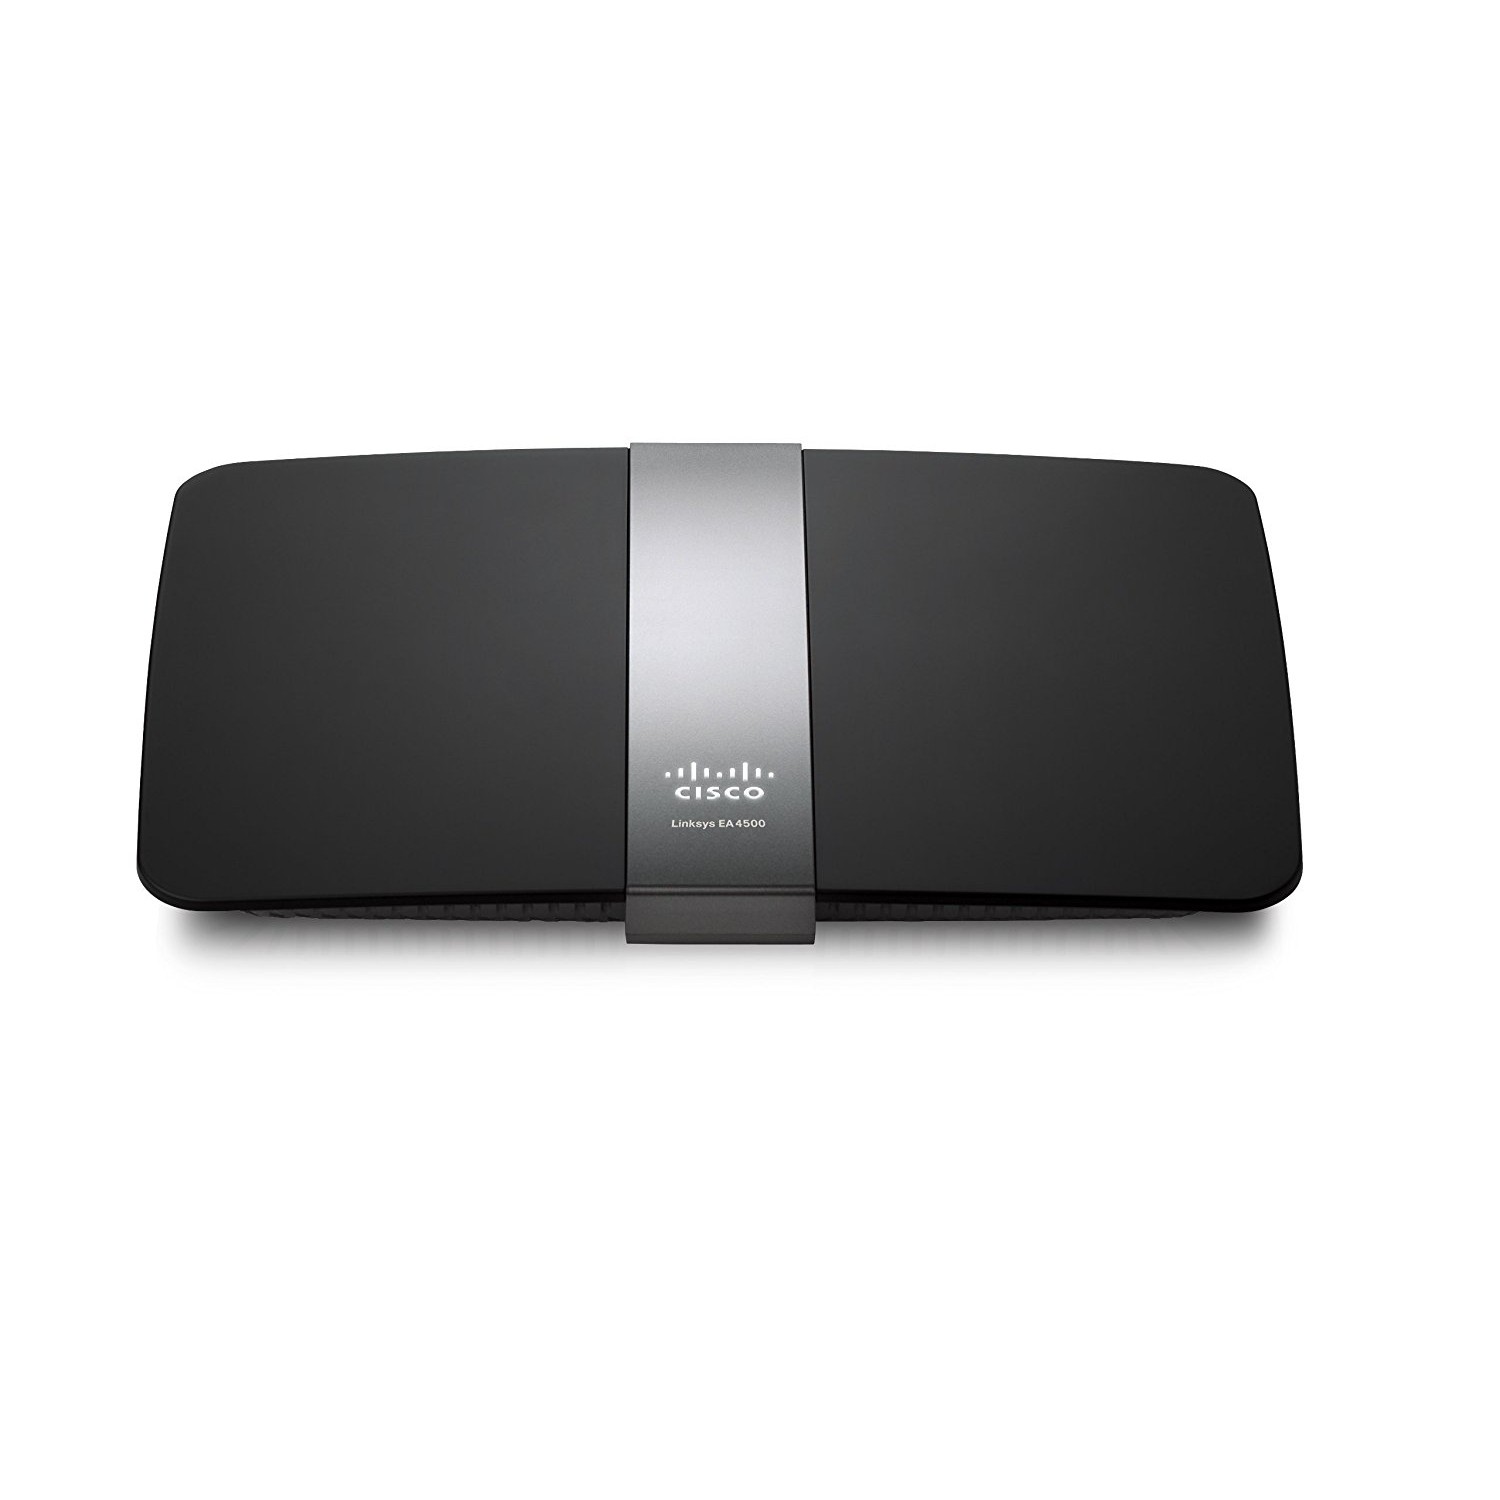 Linksys N900 Dual Band Wireless Router with Gigabit and USB (EA4500-CA)